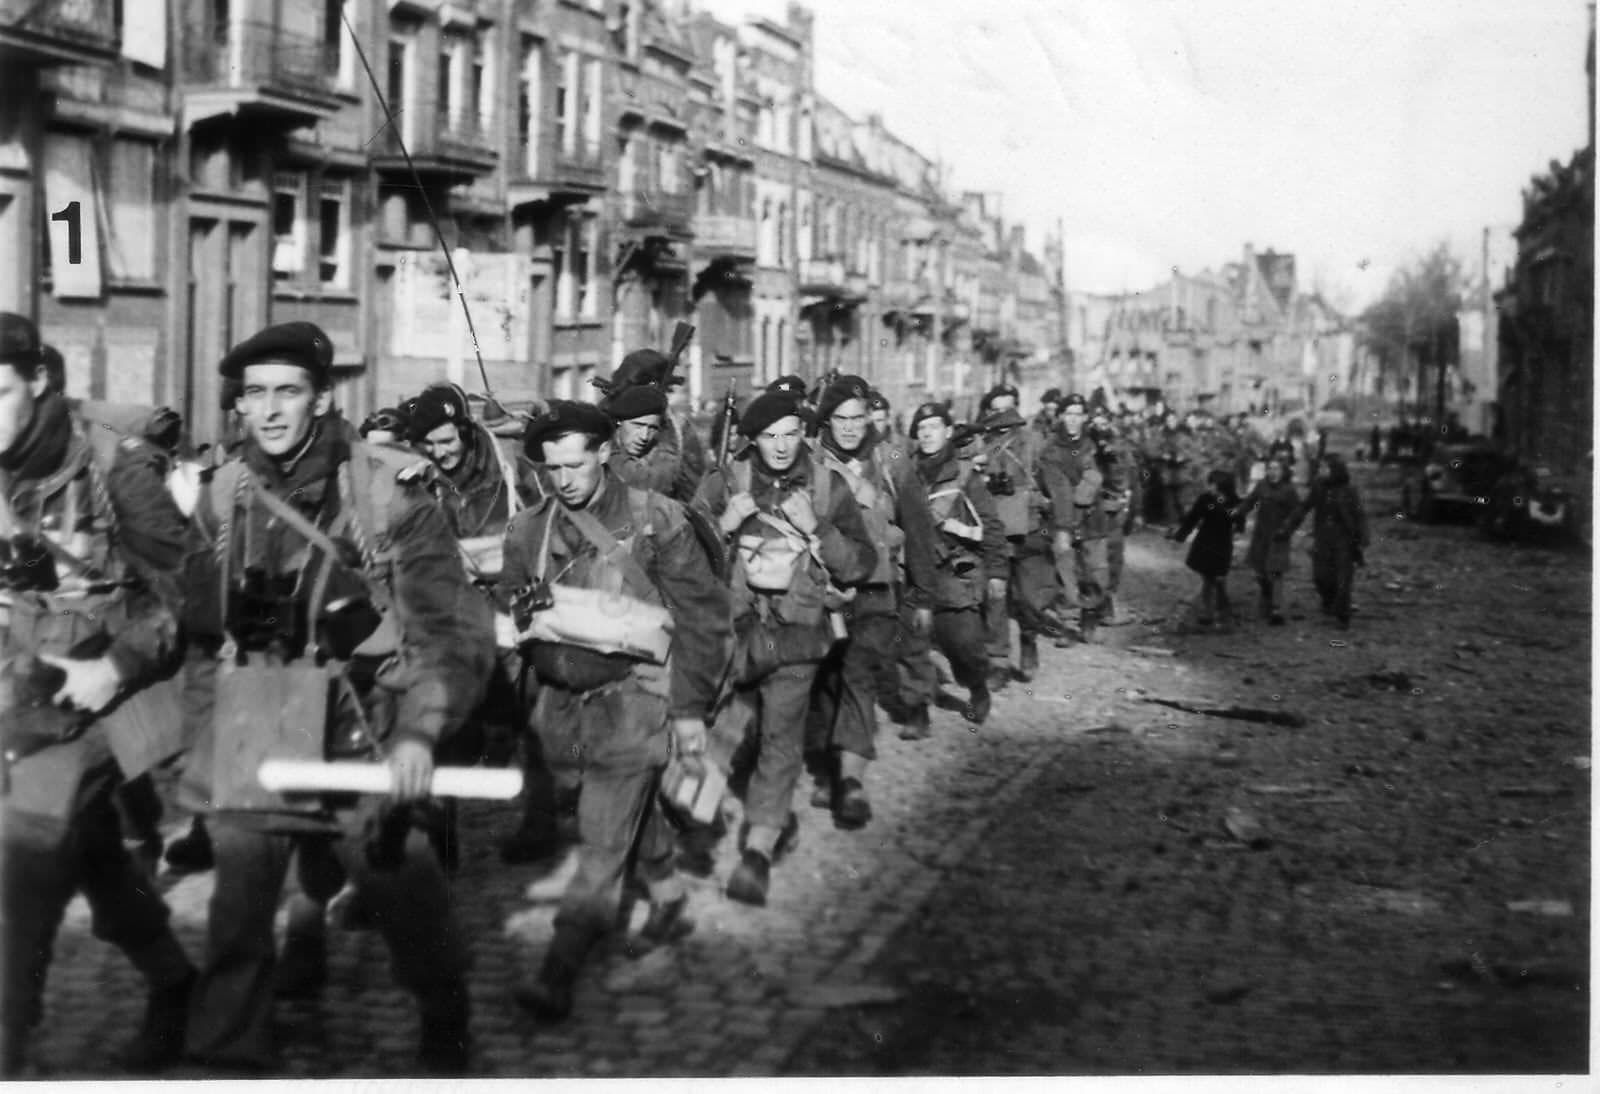 Lt de Montlaur (1st row on the left, maps in hand) and the French commandos march through the streets of Flushing (Coosjie Buskenstraat, island of Walcheren, Netherlands) on November 3rd, 1944. They are on their way to the town of Domburg, in the north-west of the island. The photo was taken by the Daily Sketch reporter and published in that newspaper on November 8th.